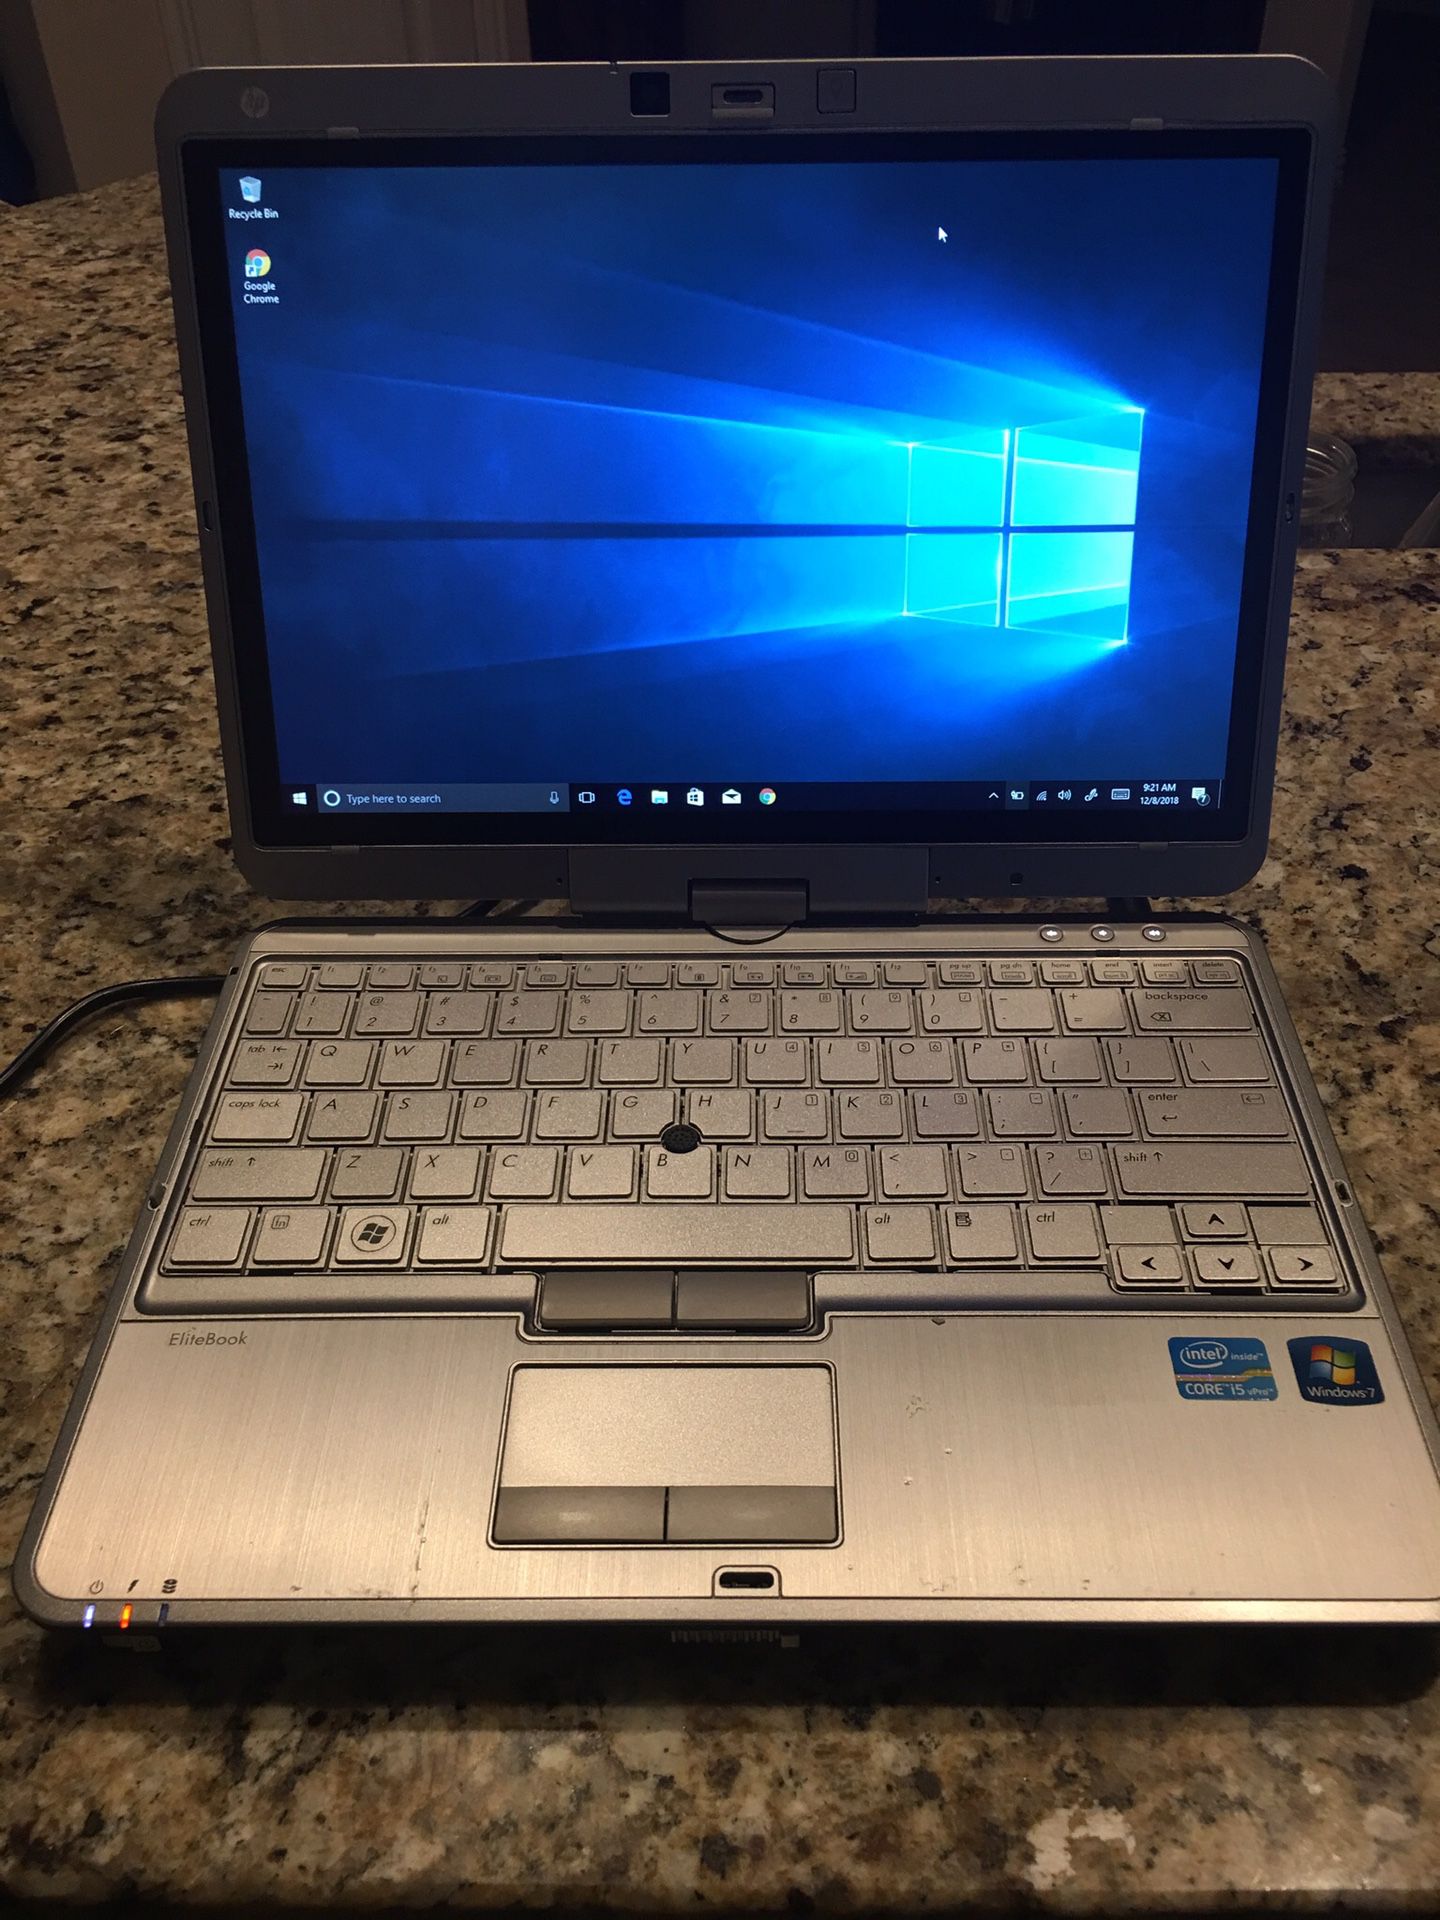 Hp EliteBook 2760P I5 Processor 4 Gb Ram 250 Drive windows 10 Office 2016 Touch Screen Great for school or work